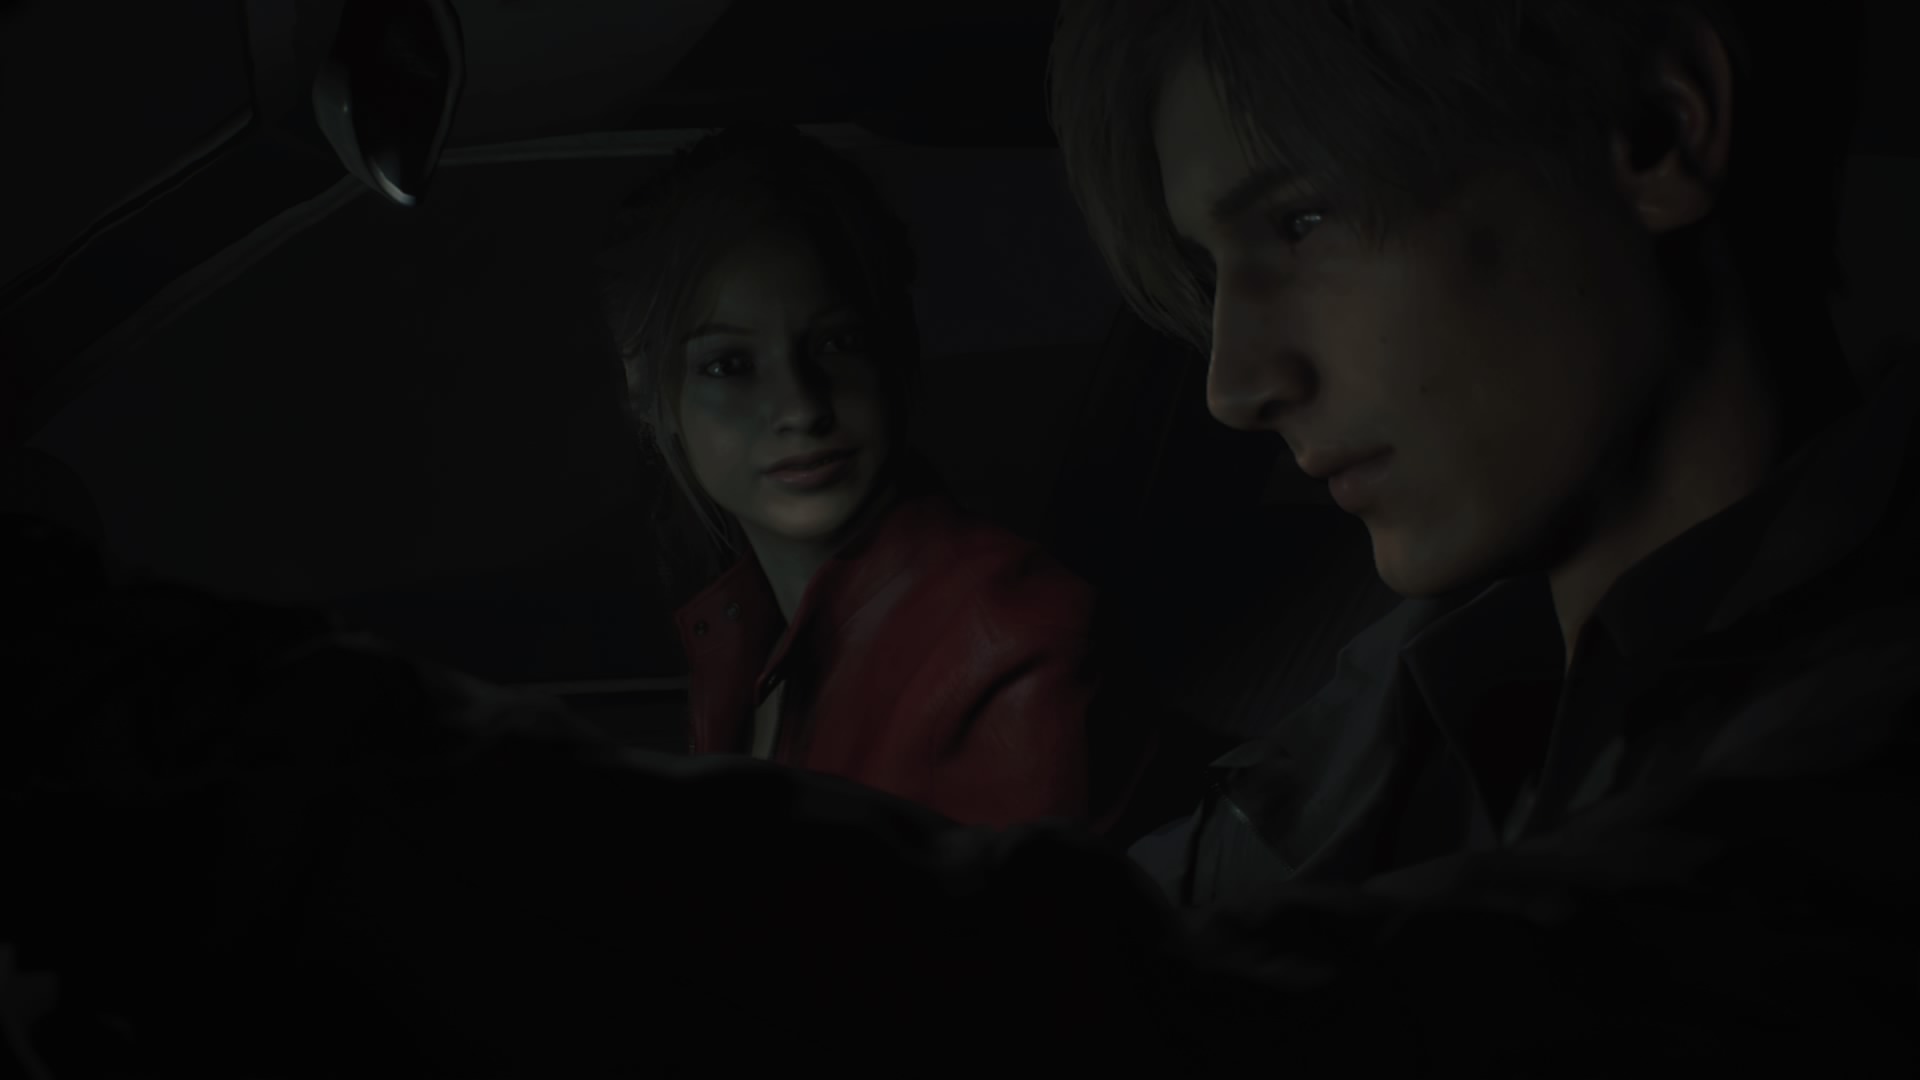 Resident Evil 2 Remake Resident Evil 2 Resident Evil Leon S Kennedy PlayStation 4 PlayStation Claire 1920x1080